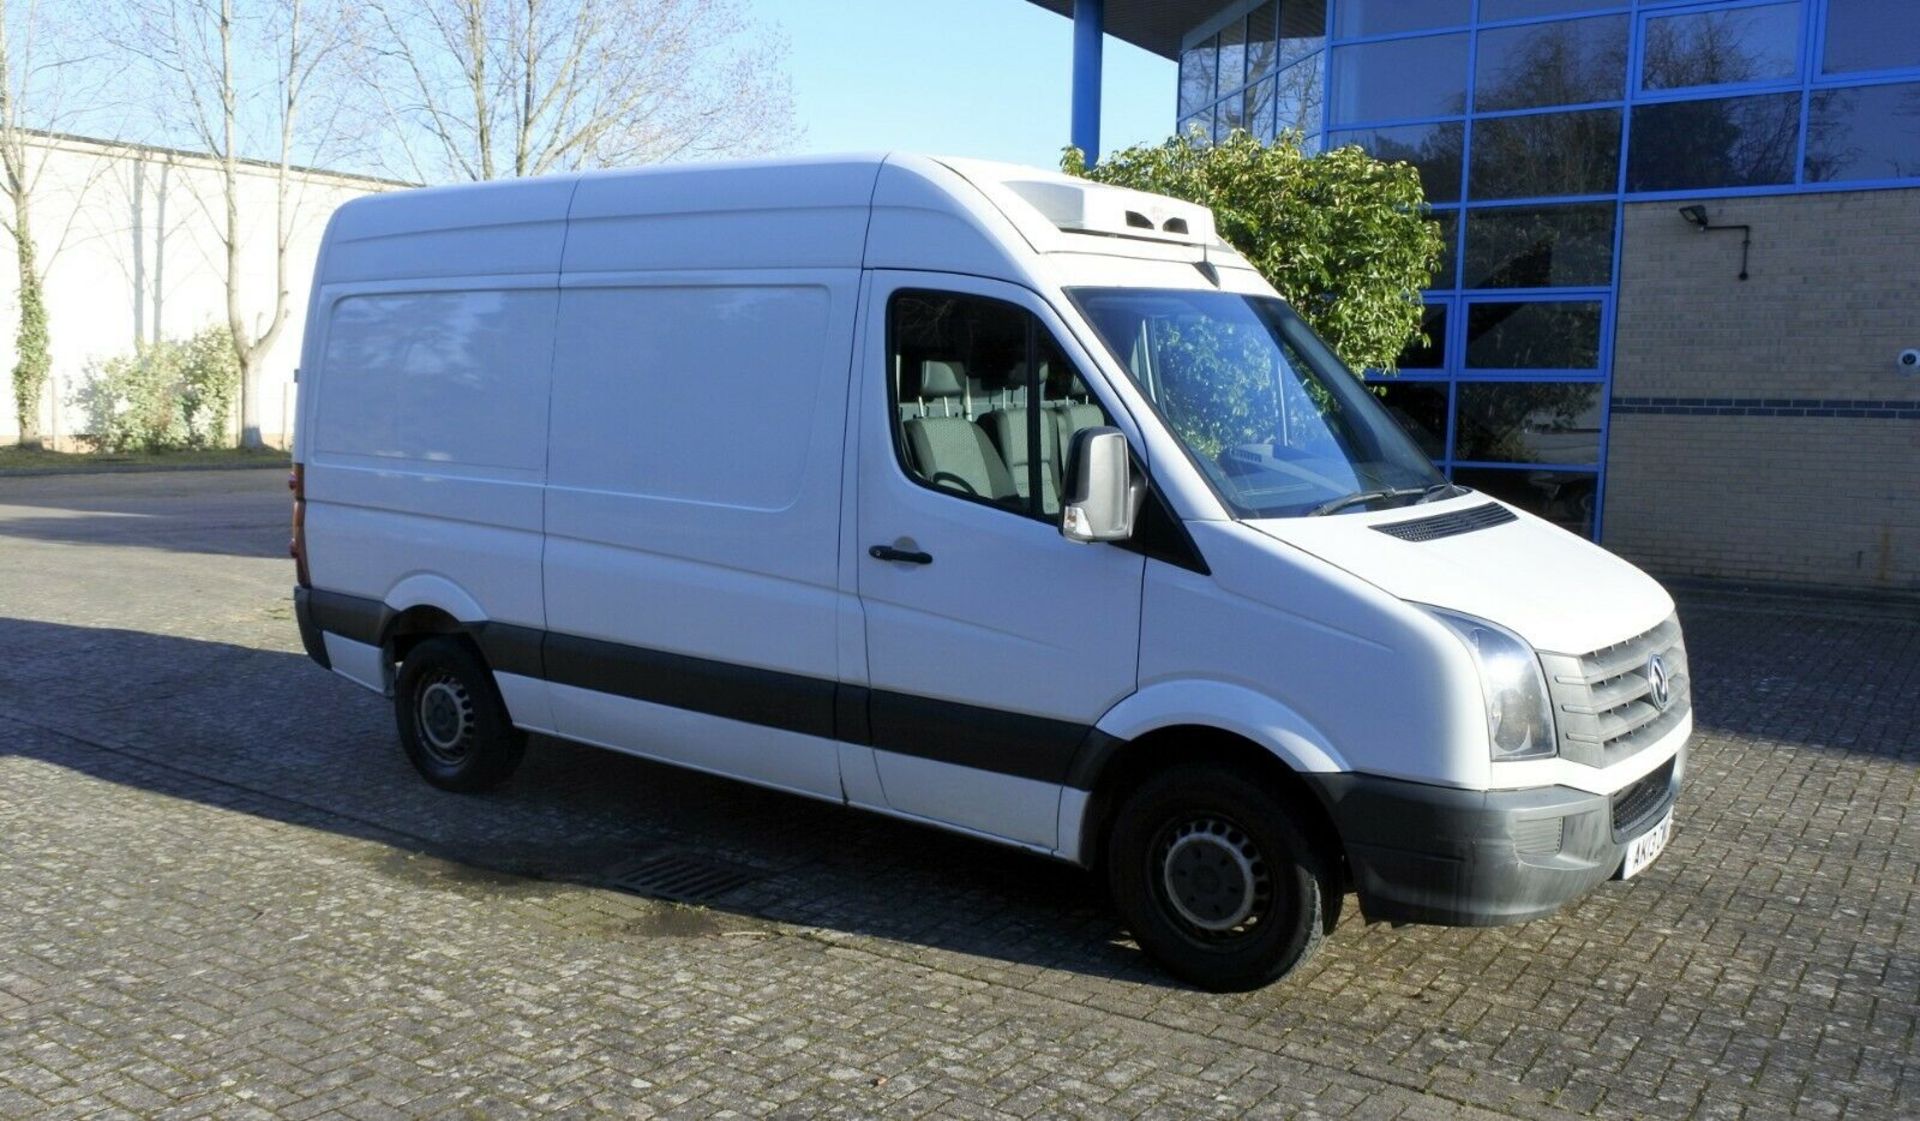 Vw Crafter CR35 TDI 109ps Chiller Van - Image 12 of 12